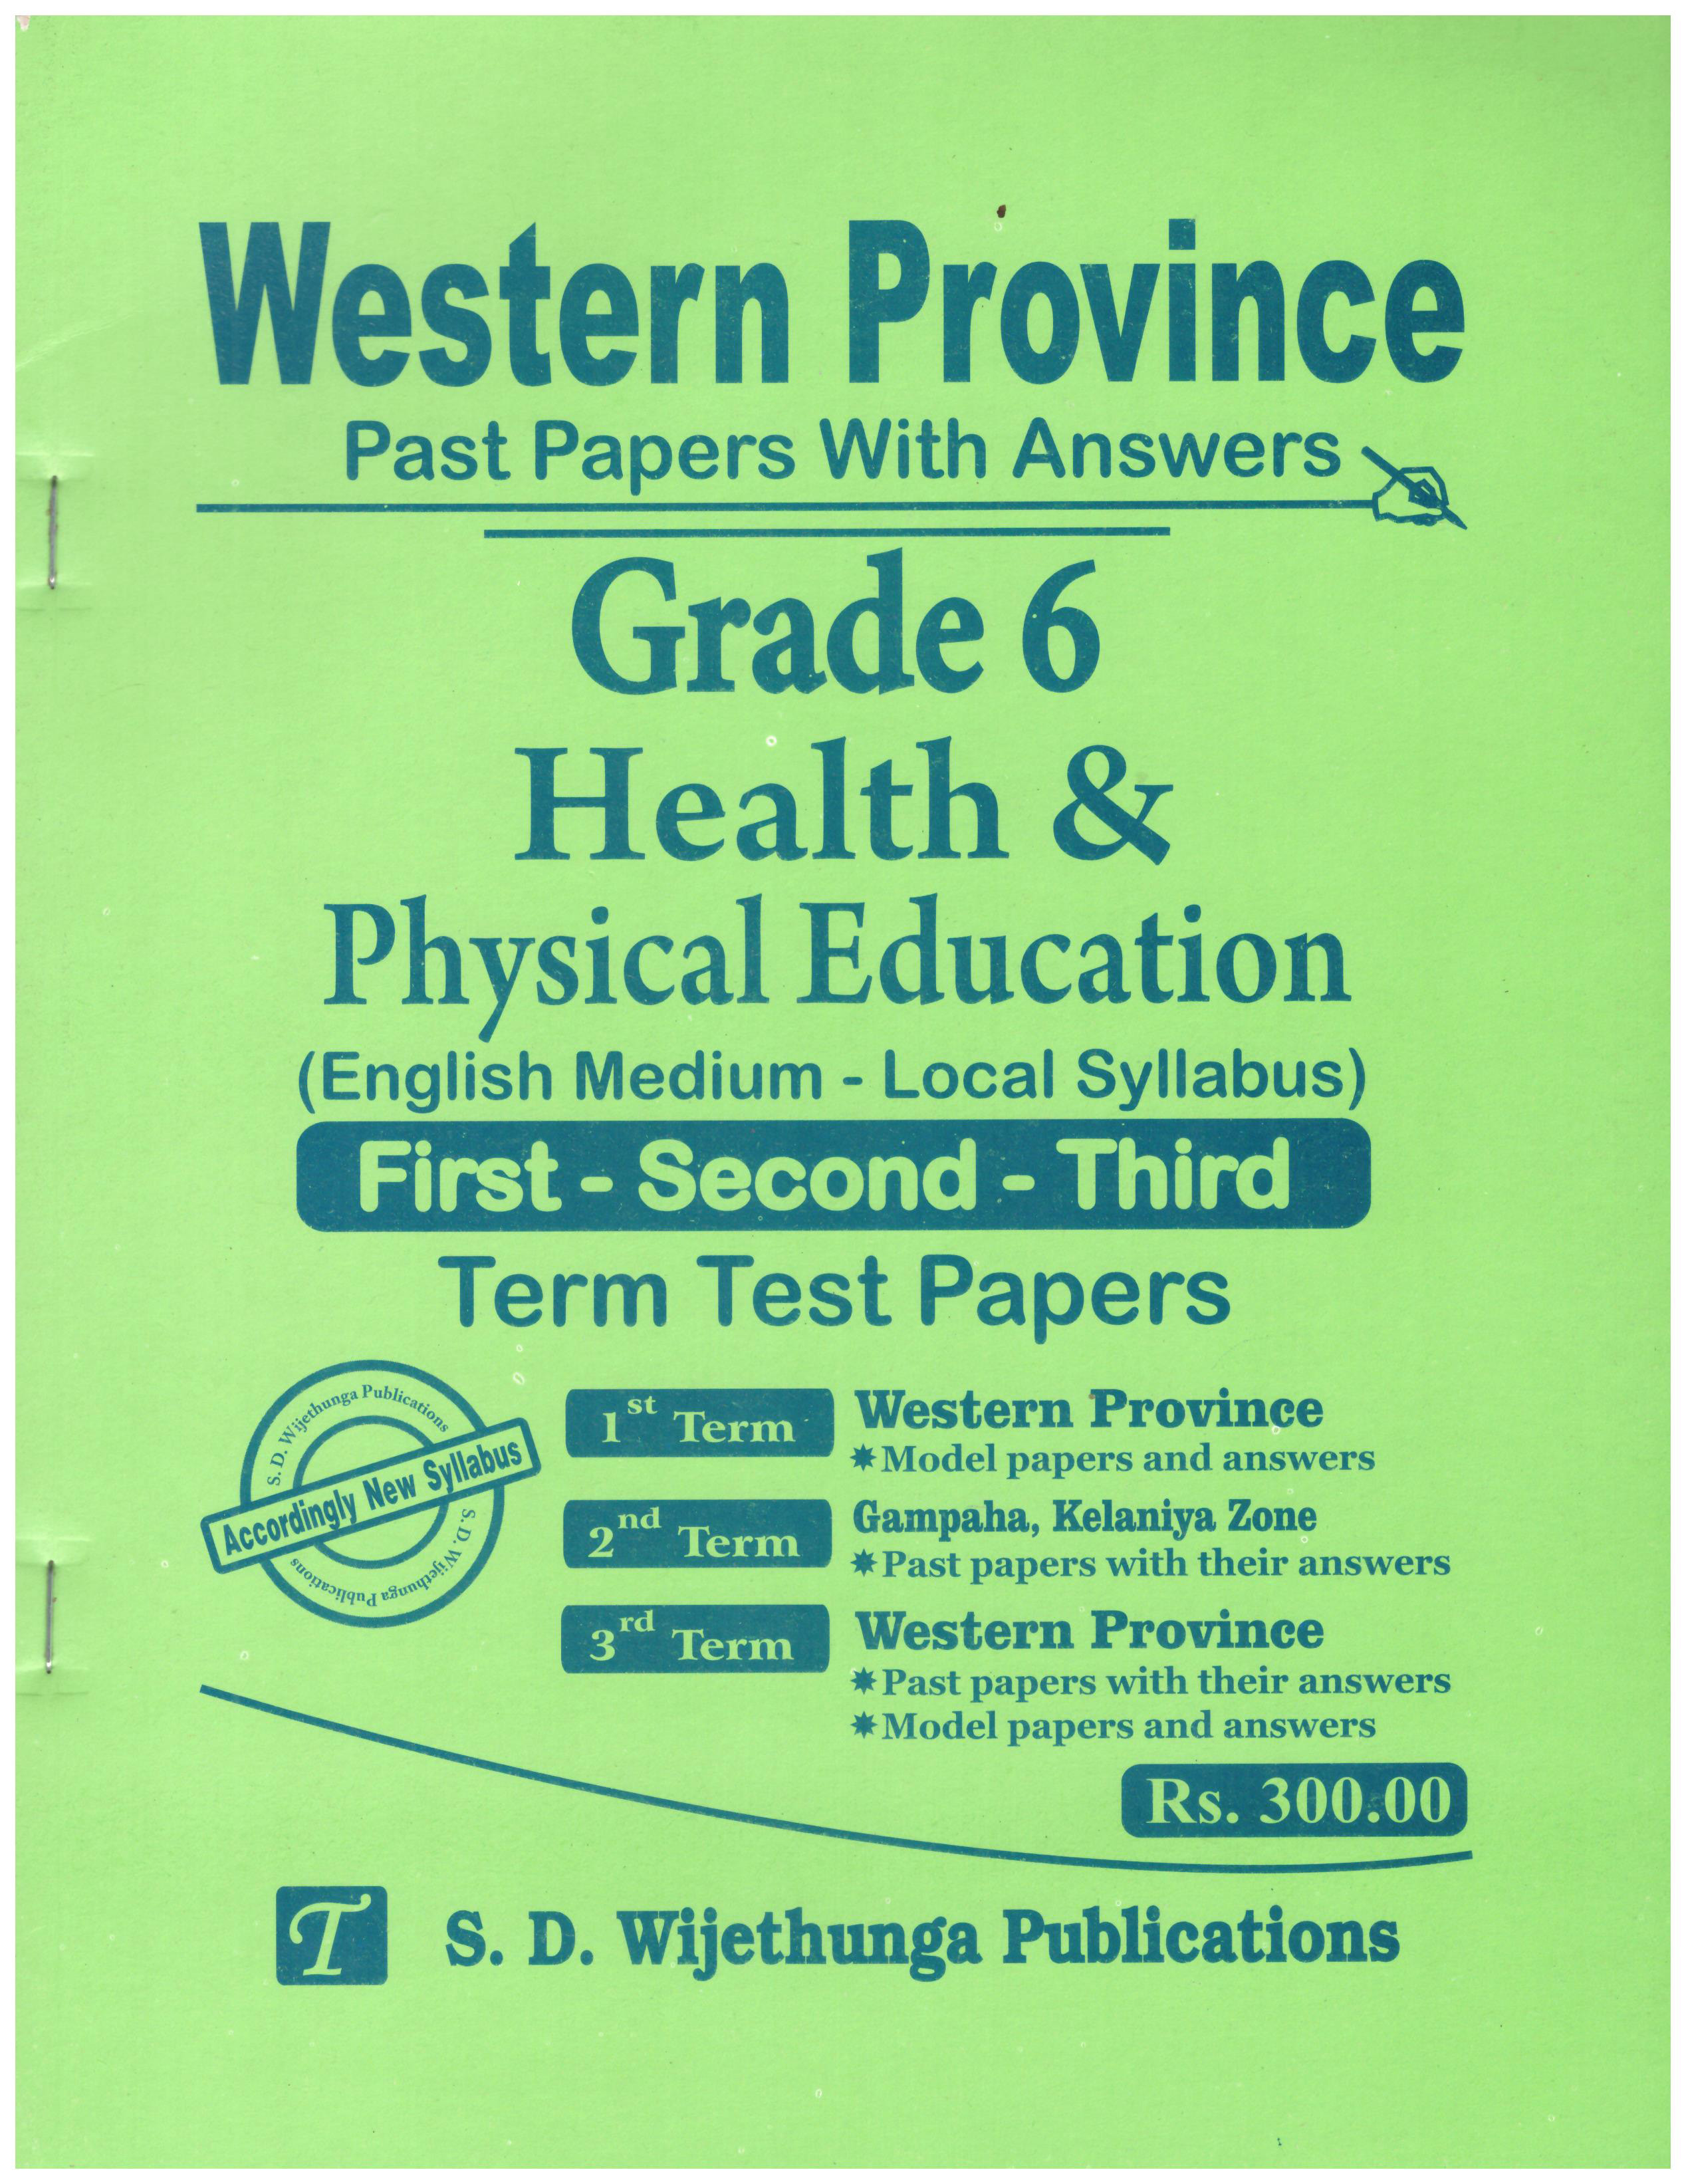 Western Province Past Papers With Answers Grade 6 Health and Physical Education First Second Third Term Test Papers